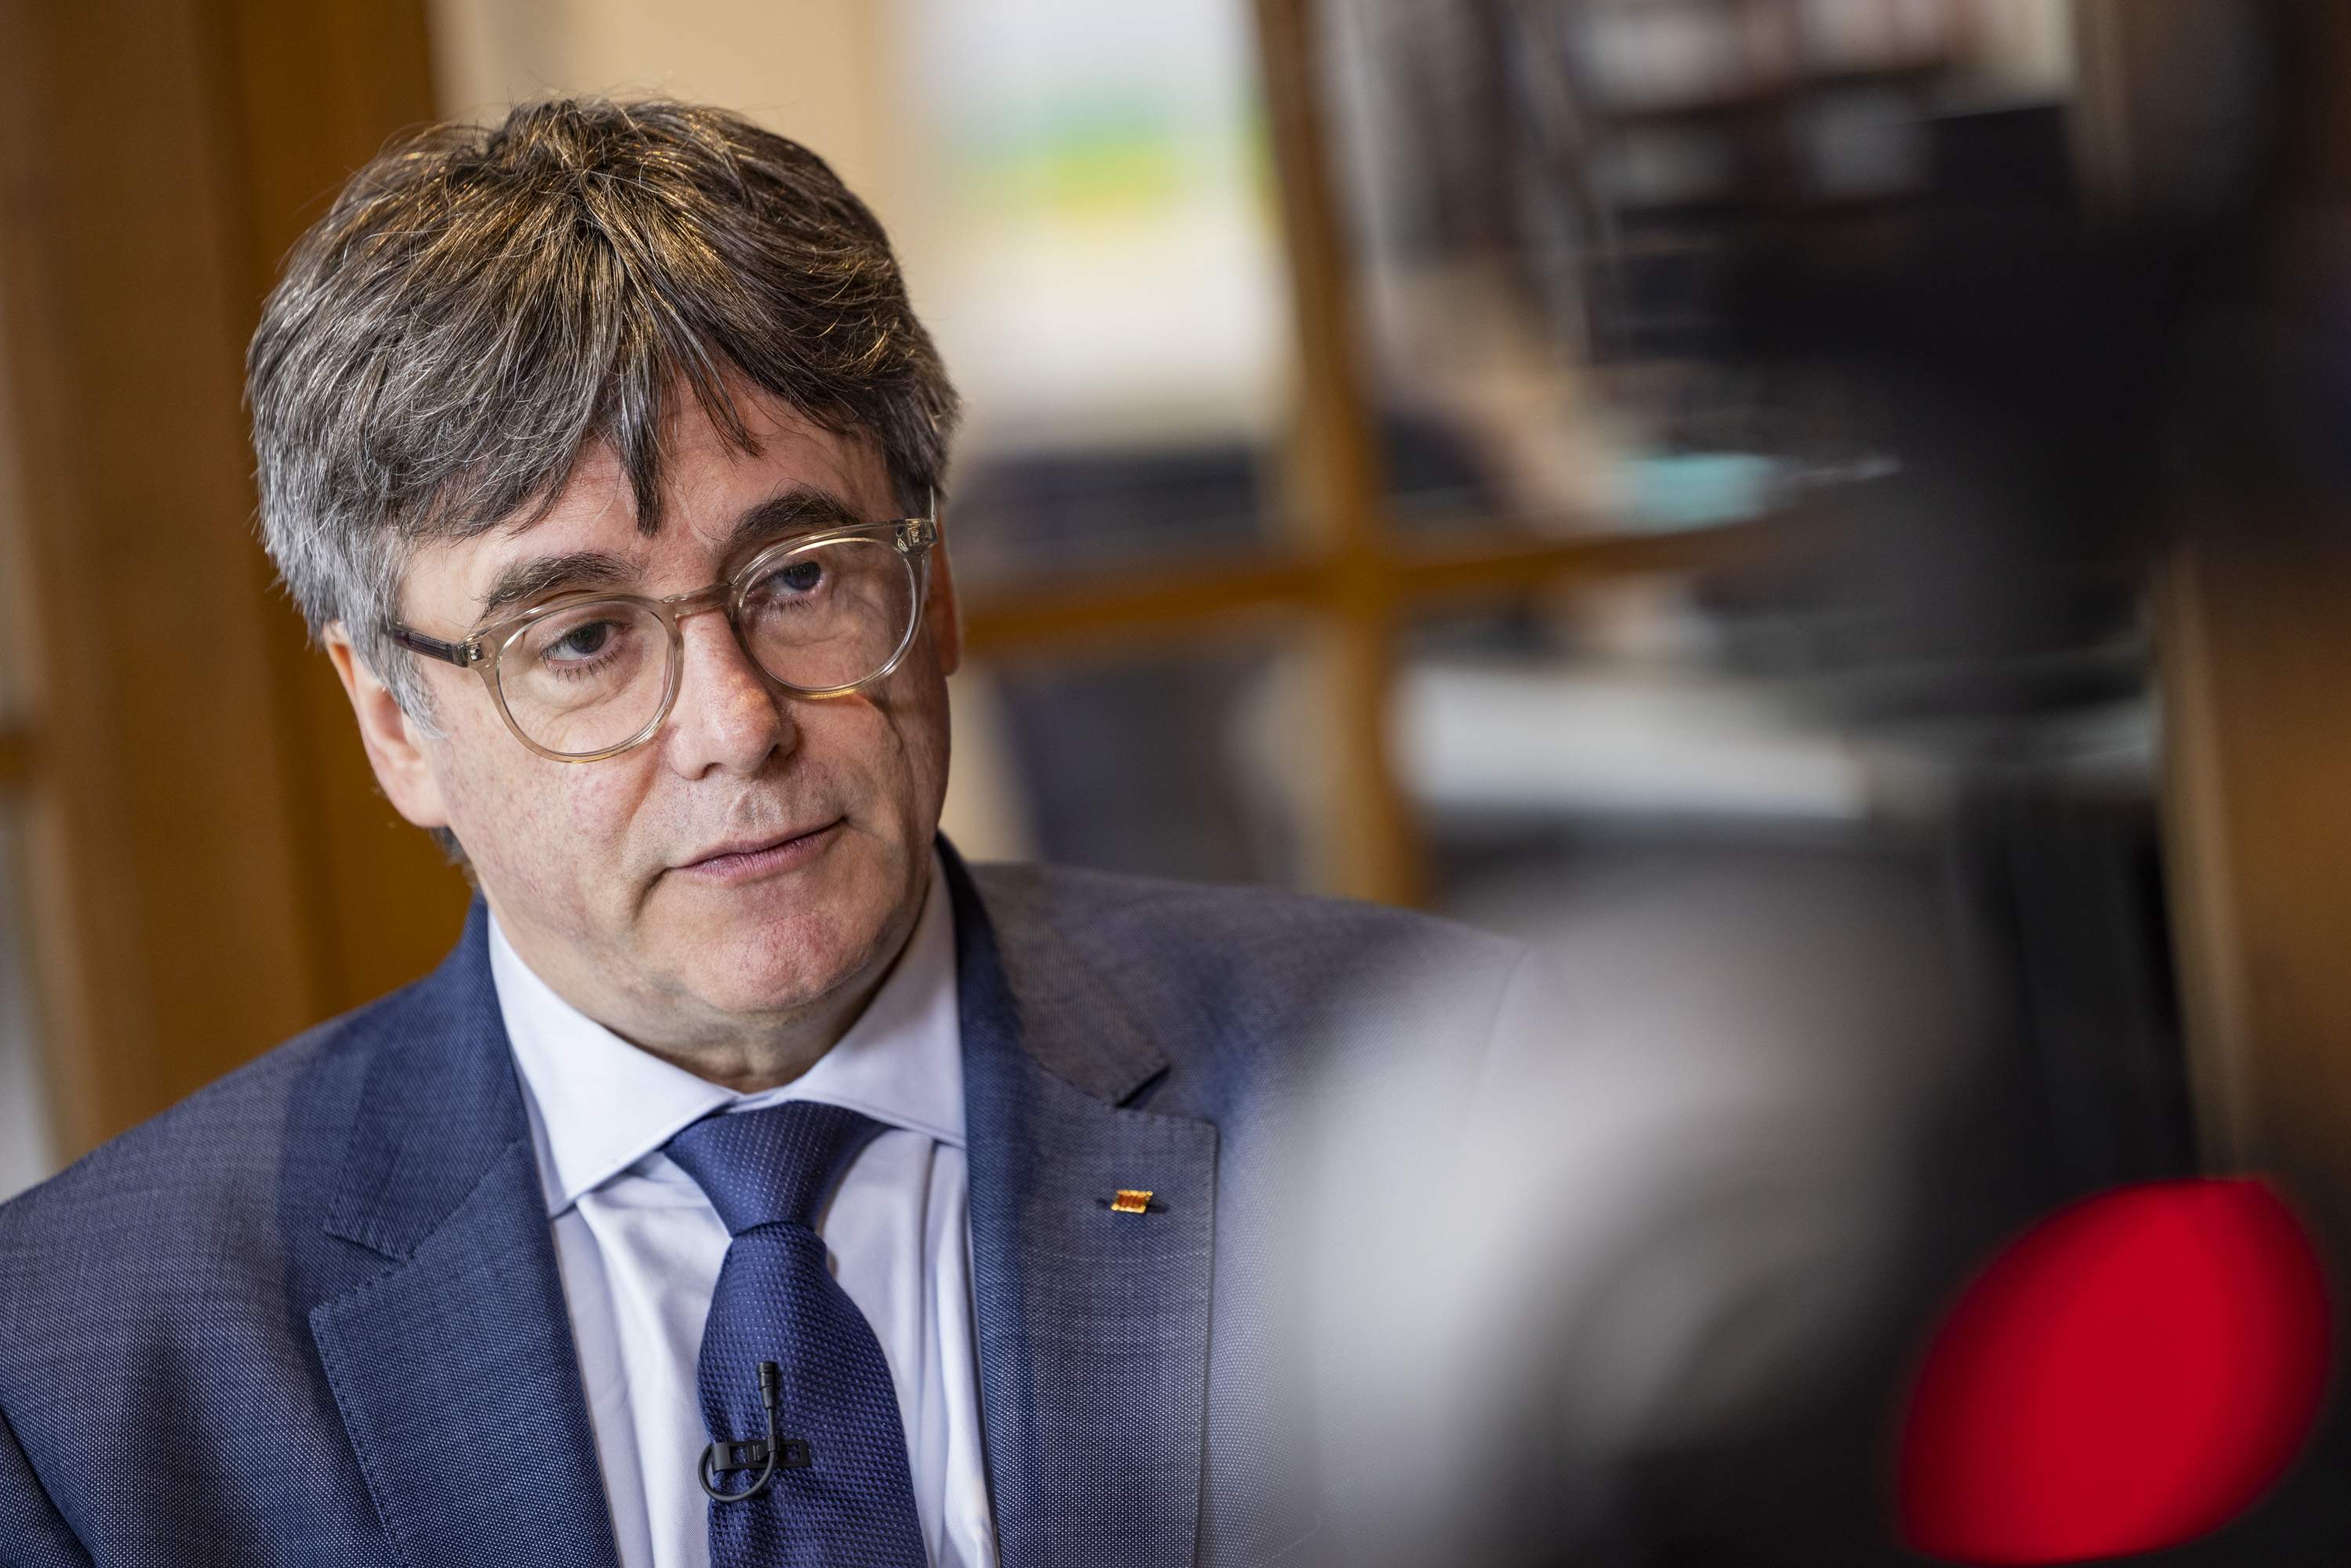 Puigdemont: "I am alarmed by Catalonia's regression as a country and its poor quality government"